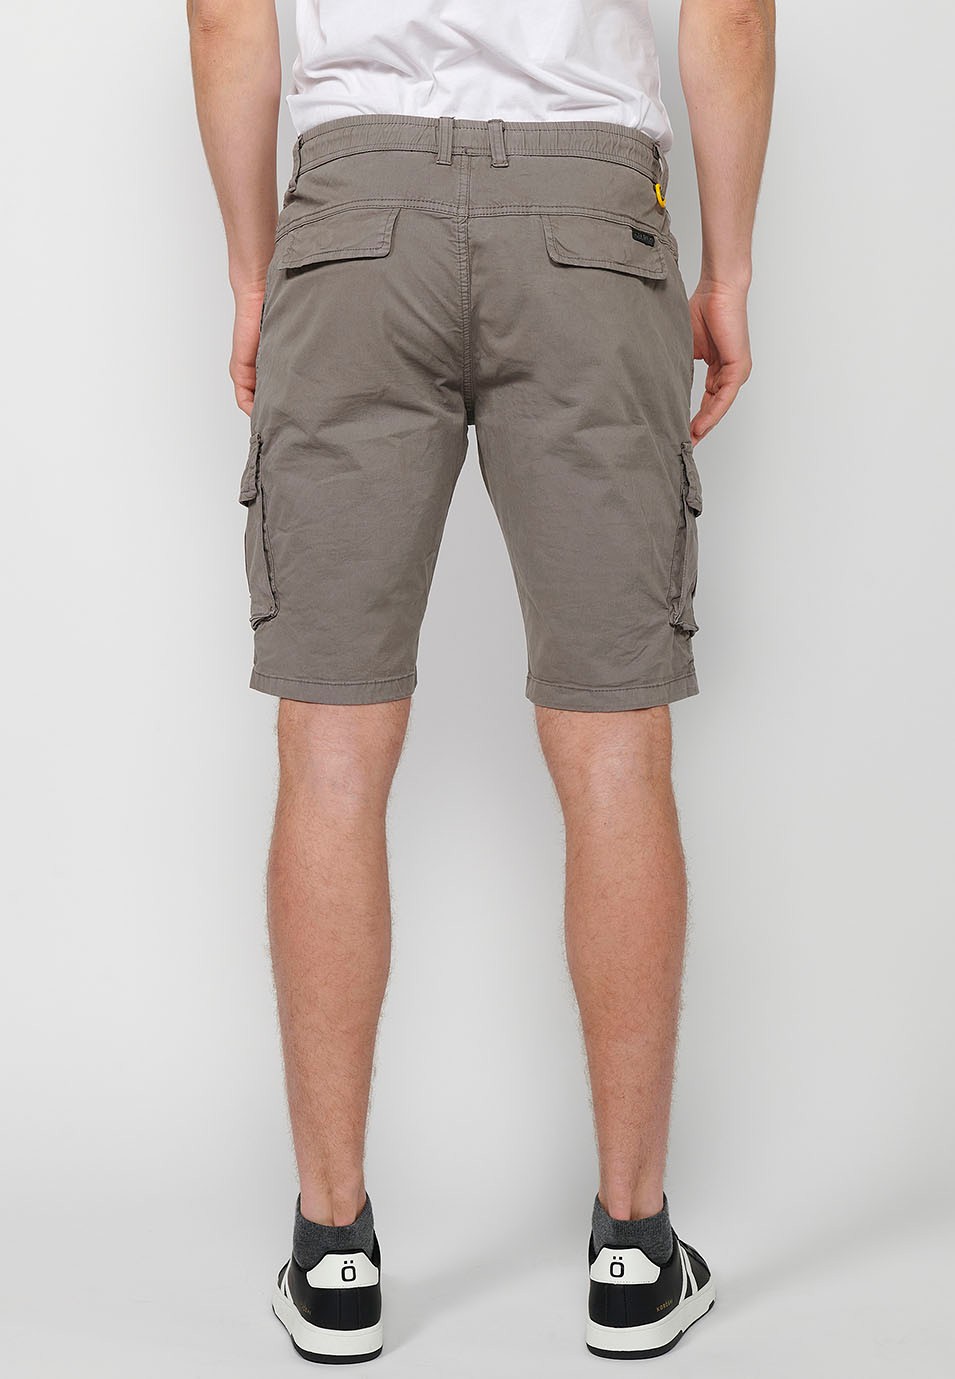 Cargo shorts with side pockets with flap and front closure with zipper and button Taupe Color for Men 3